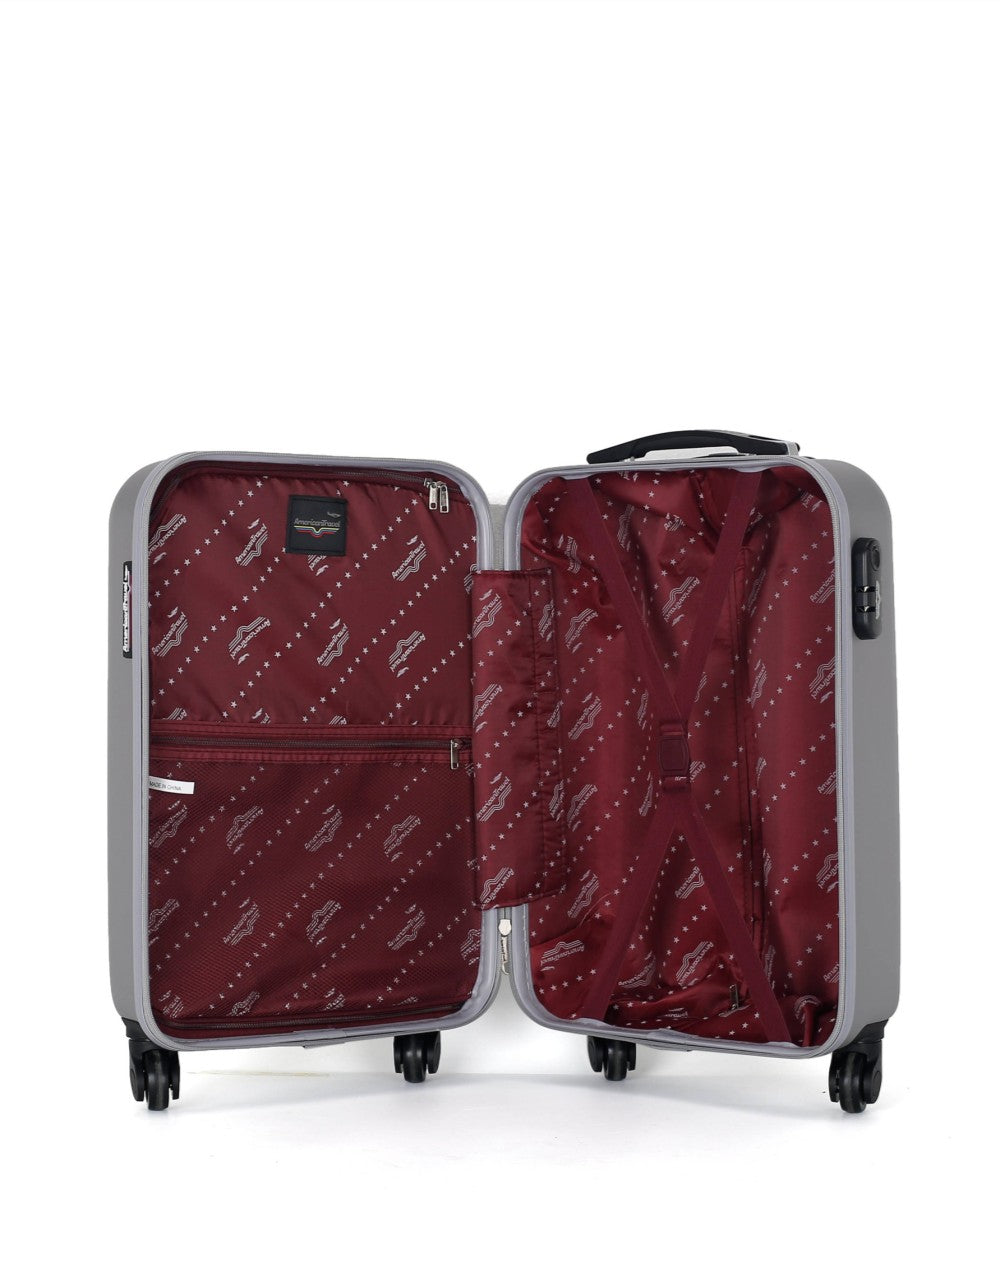 Valise Cabine ABS QUEENS 4 Roues 55 cm